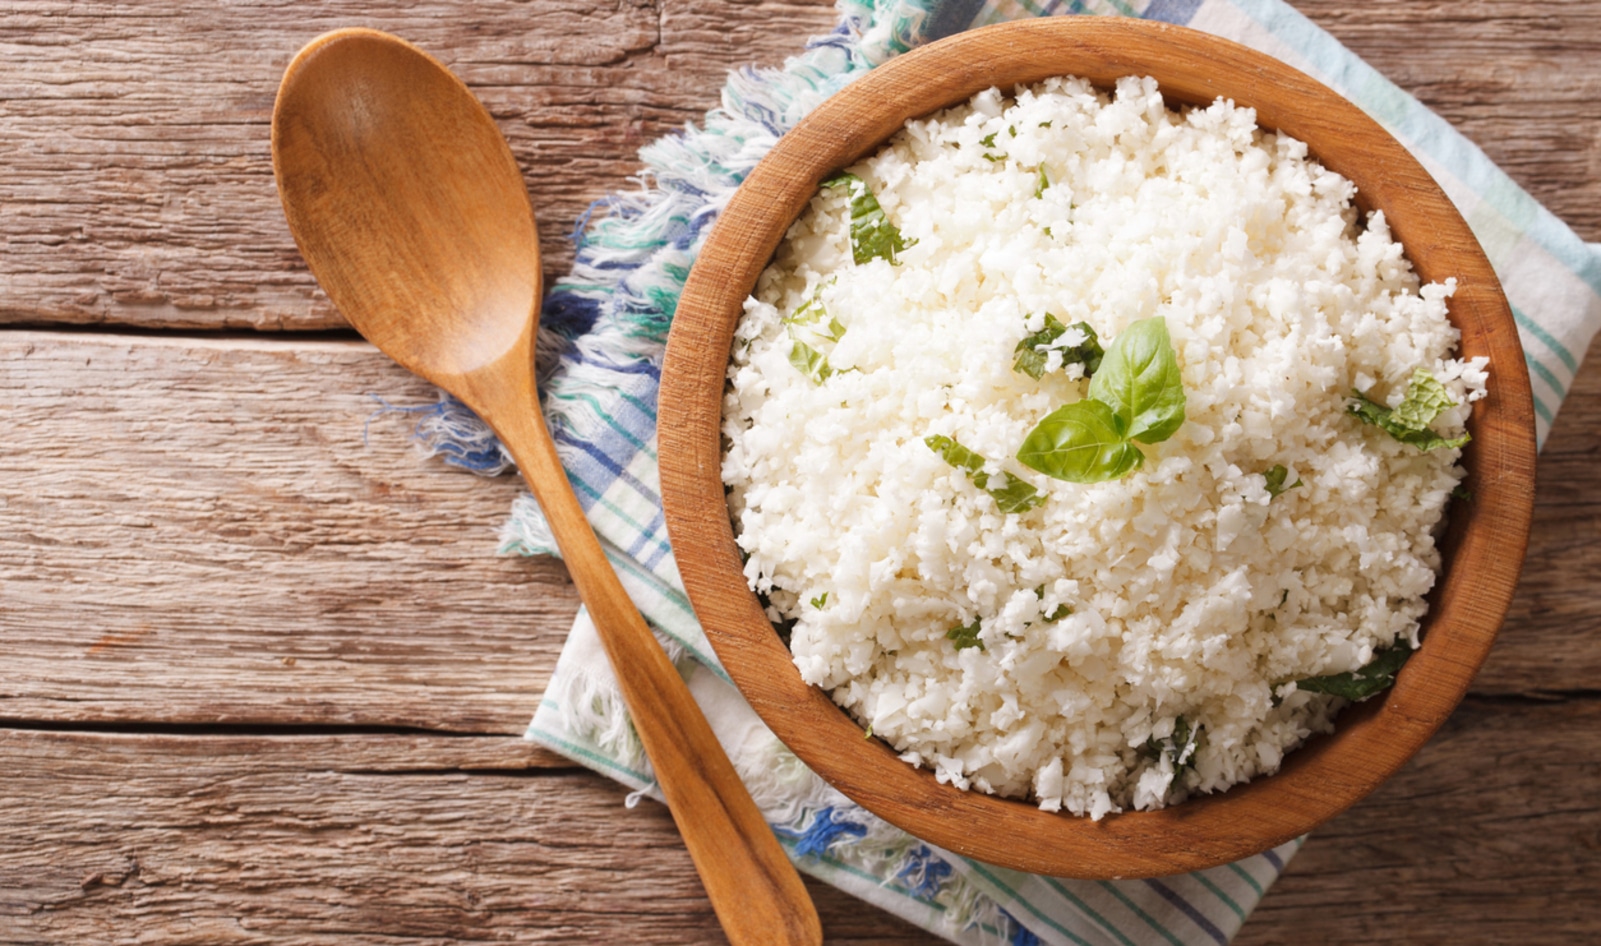 Arkansas Outlaws Labeling Cauliflower Rice as “Rice”